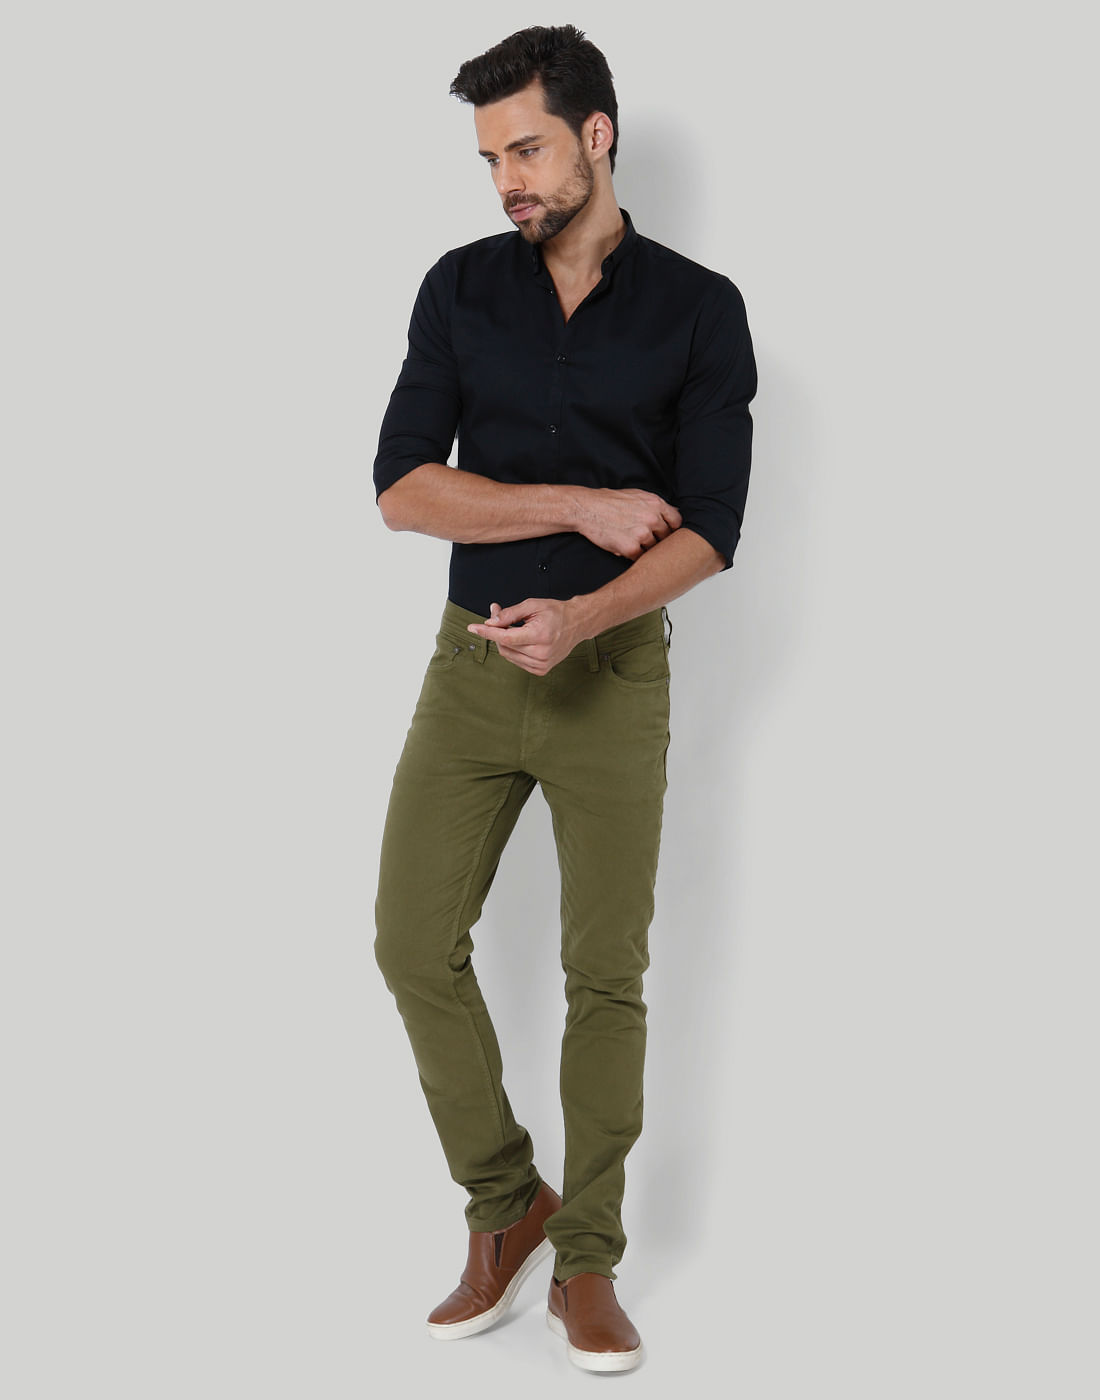 olive color chinos